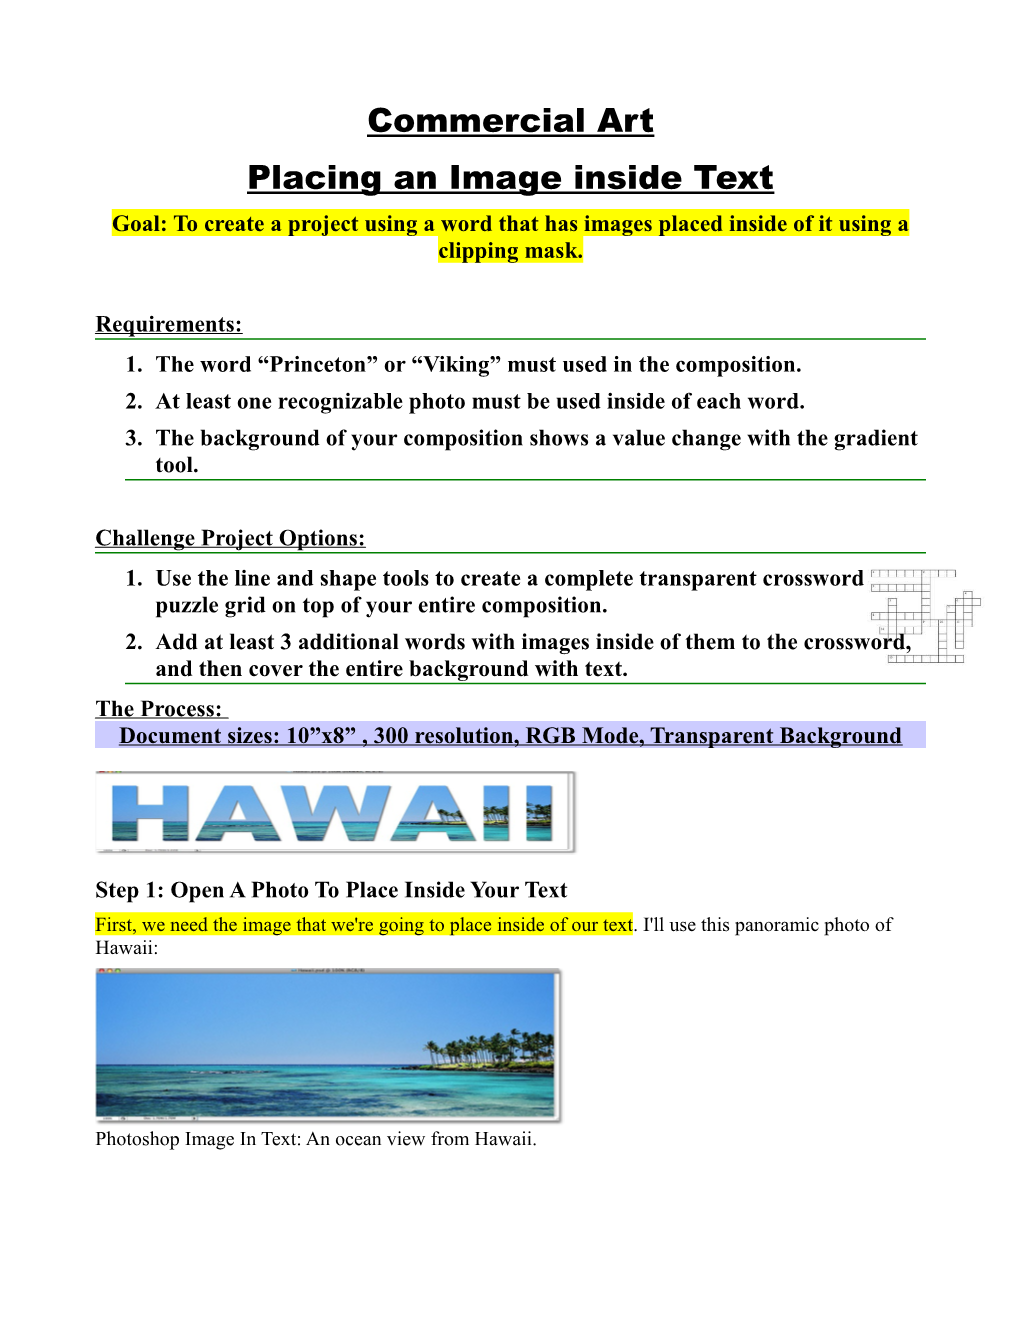 Placing an Image Inside Text